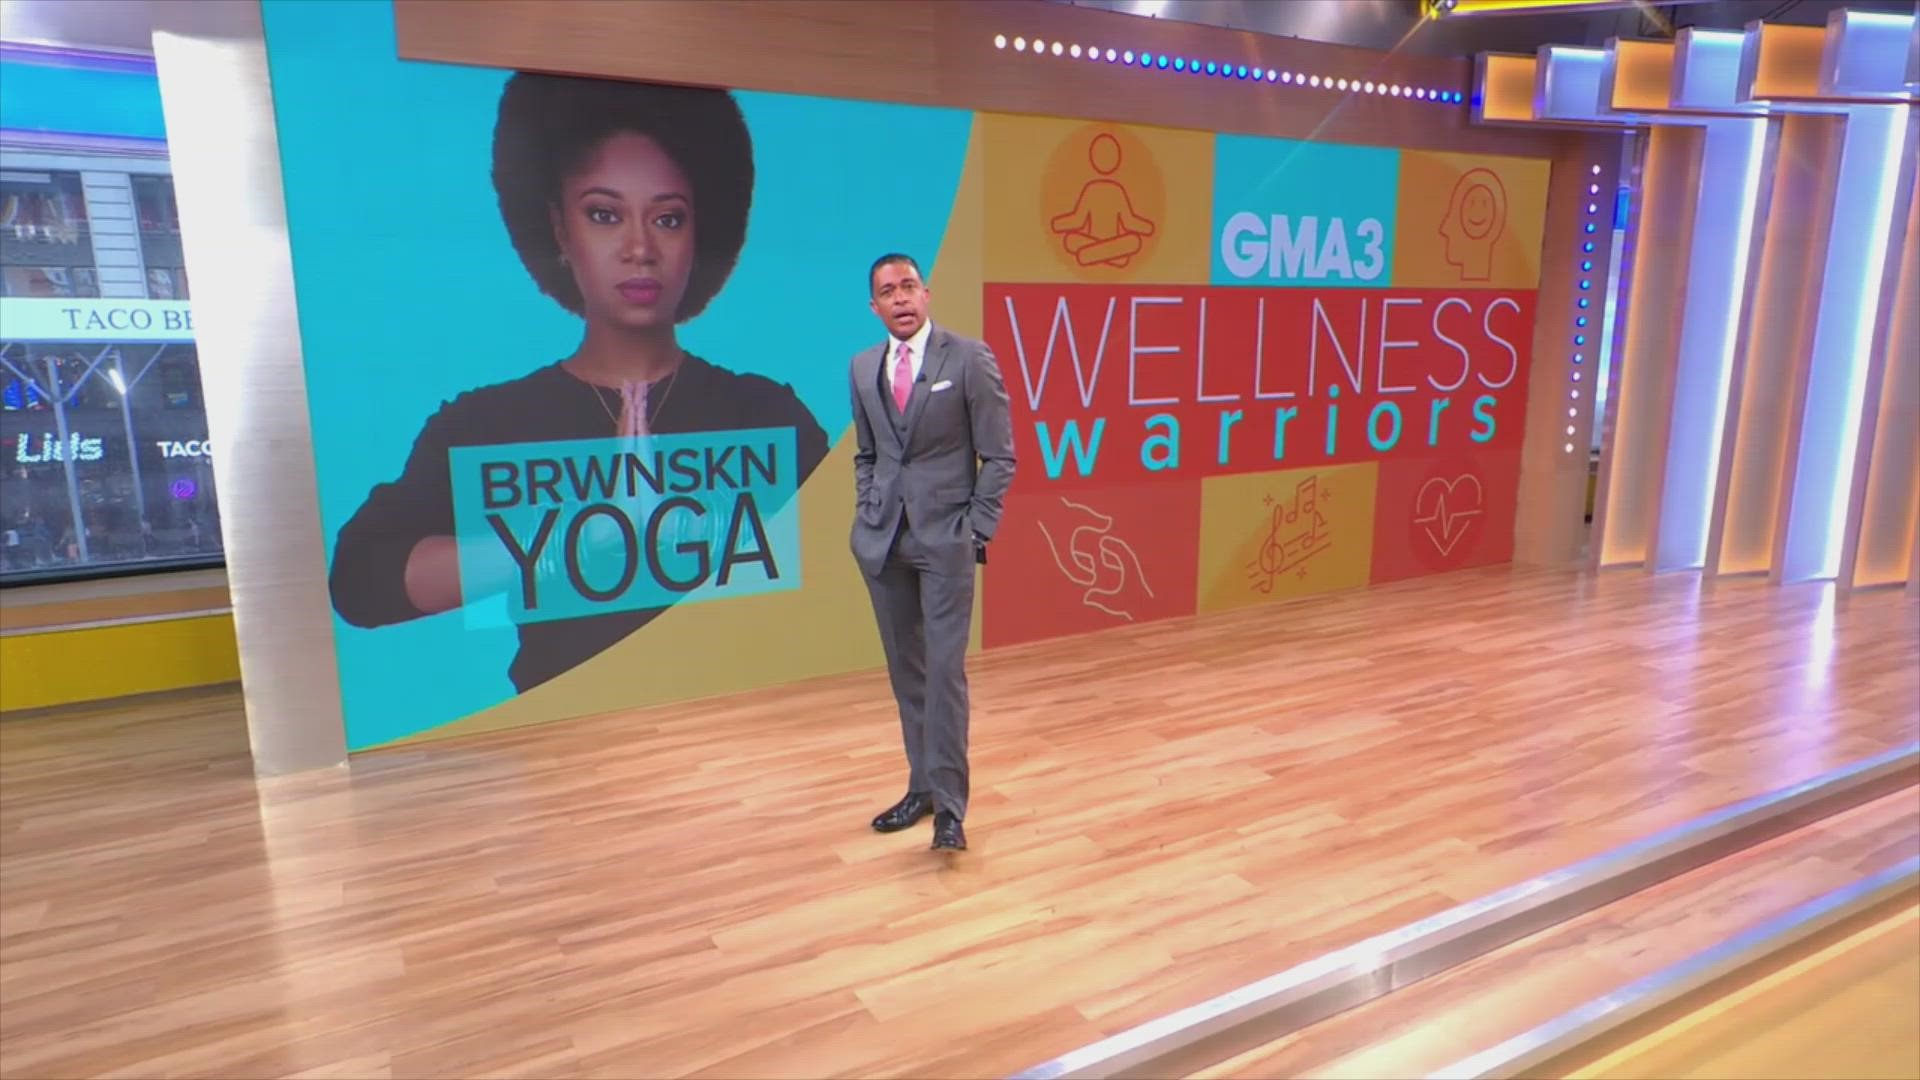 Good Morning America launched its "Wellness Warriors" series Monday, and featured the good work being done by Shawandra Ford and her Brwnskn Yoga studio.